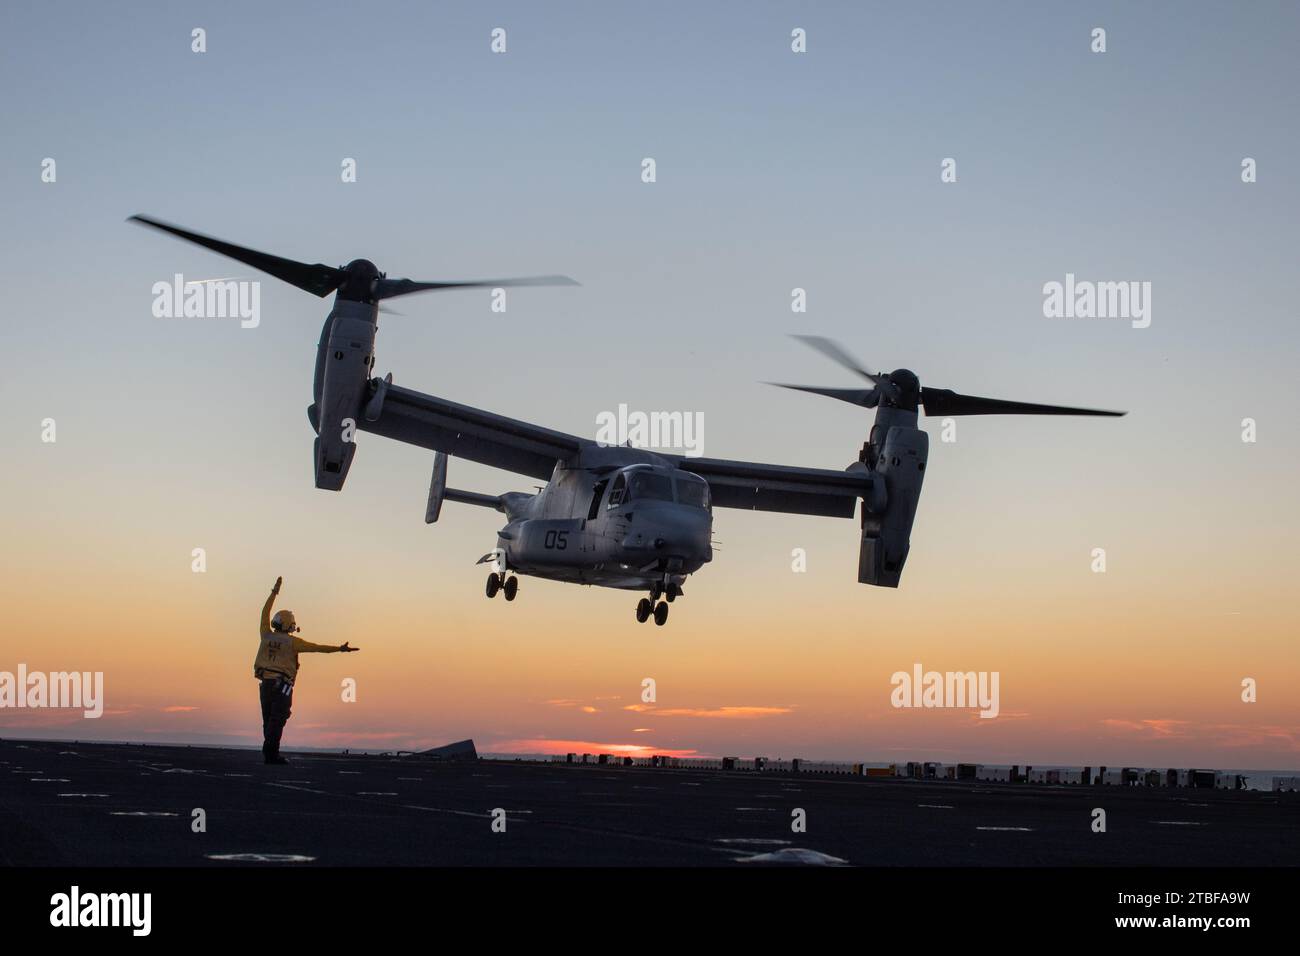 North Carolina, USA. 21st Oct, 2021. A U.S Navy Sailor assigned to amphibious assault ship USS Kearsarge (LHD 3) directs the landing of an MV-22 Osprey assigned to Marine Medium Tiltrotor Squadron (VMM) 263, during flight operations aboard amphibious assault ship USS Kearsarge (LHD 3), 'Octoberober 20, 2021. VMM-263 is the Aviation Combat Element for the 22nd Marine Expeditionary Unit. Kearsarge, the flagship for the 22nd MEU and Amphibious Squadron (PHIBRON) 6, is underway for PHIBRON-MEU Integrated Training (PMINT) in preparation for a future deployment. PMINT is the first at-sea period Stock Photo